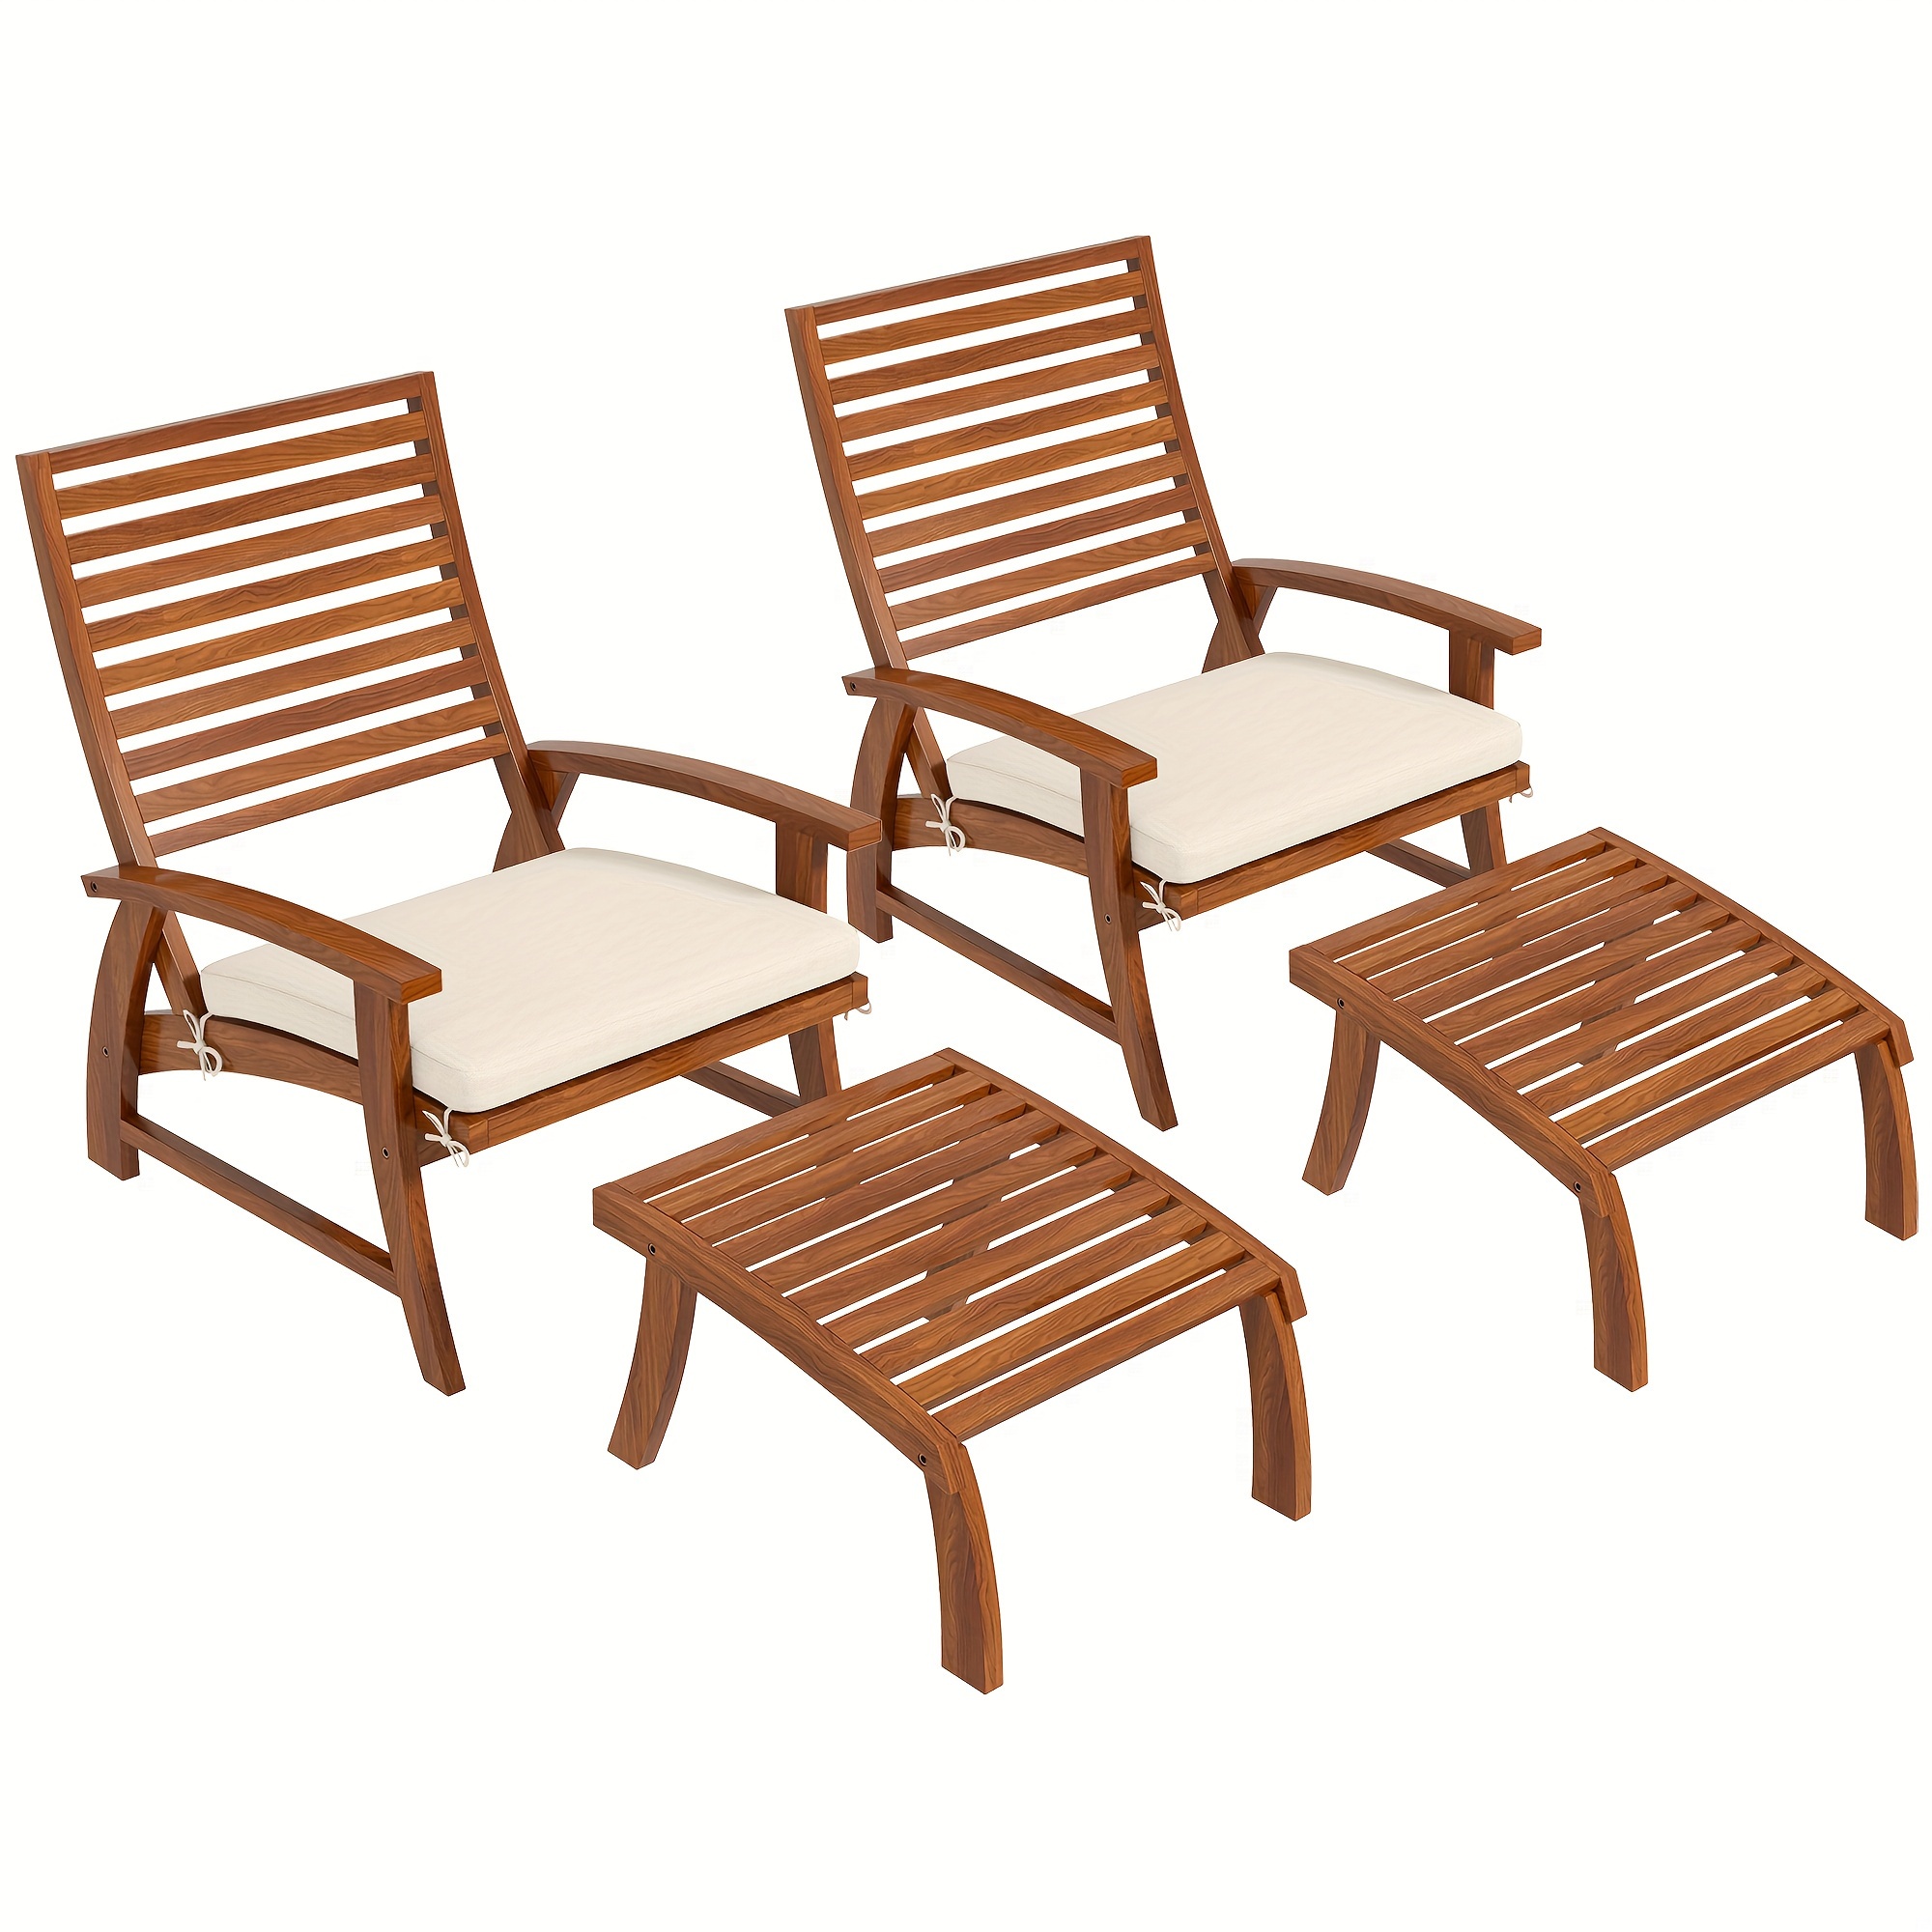 

Outsunny 4 Piece Patio Furniture Set, 2 Chairs With Cushions & Ottomans, Outdoor Chair Set For 2 With Footstools, Slatted Acacia Wood Seat & Backrest, Cream White